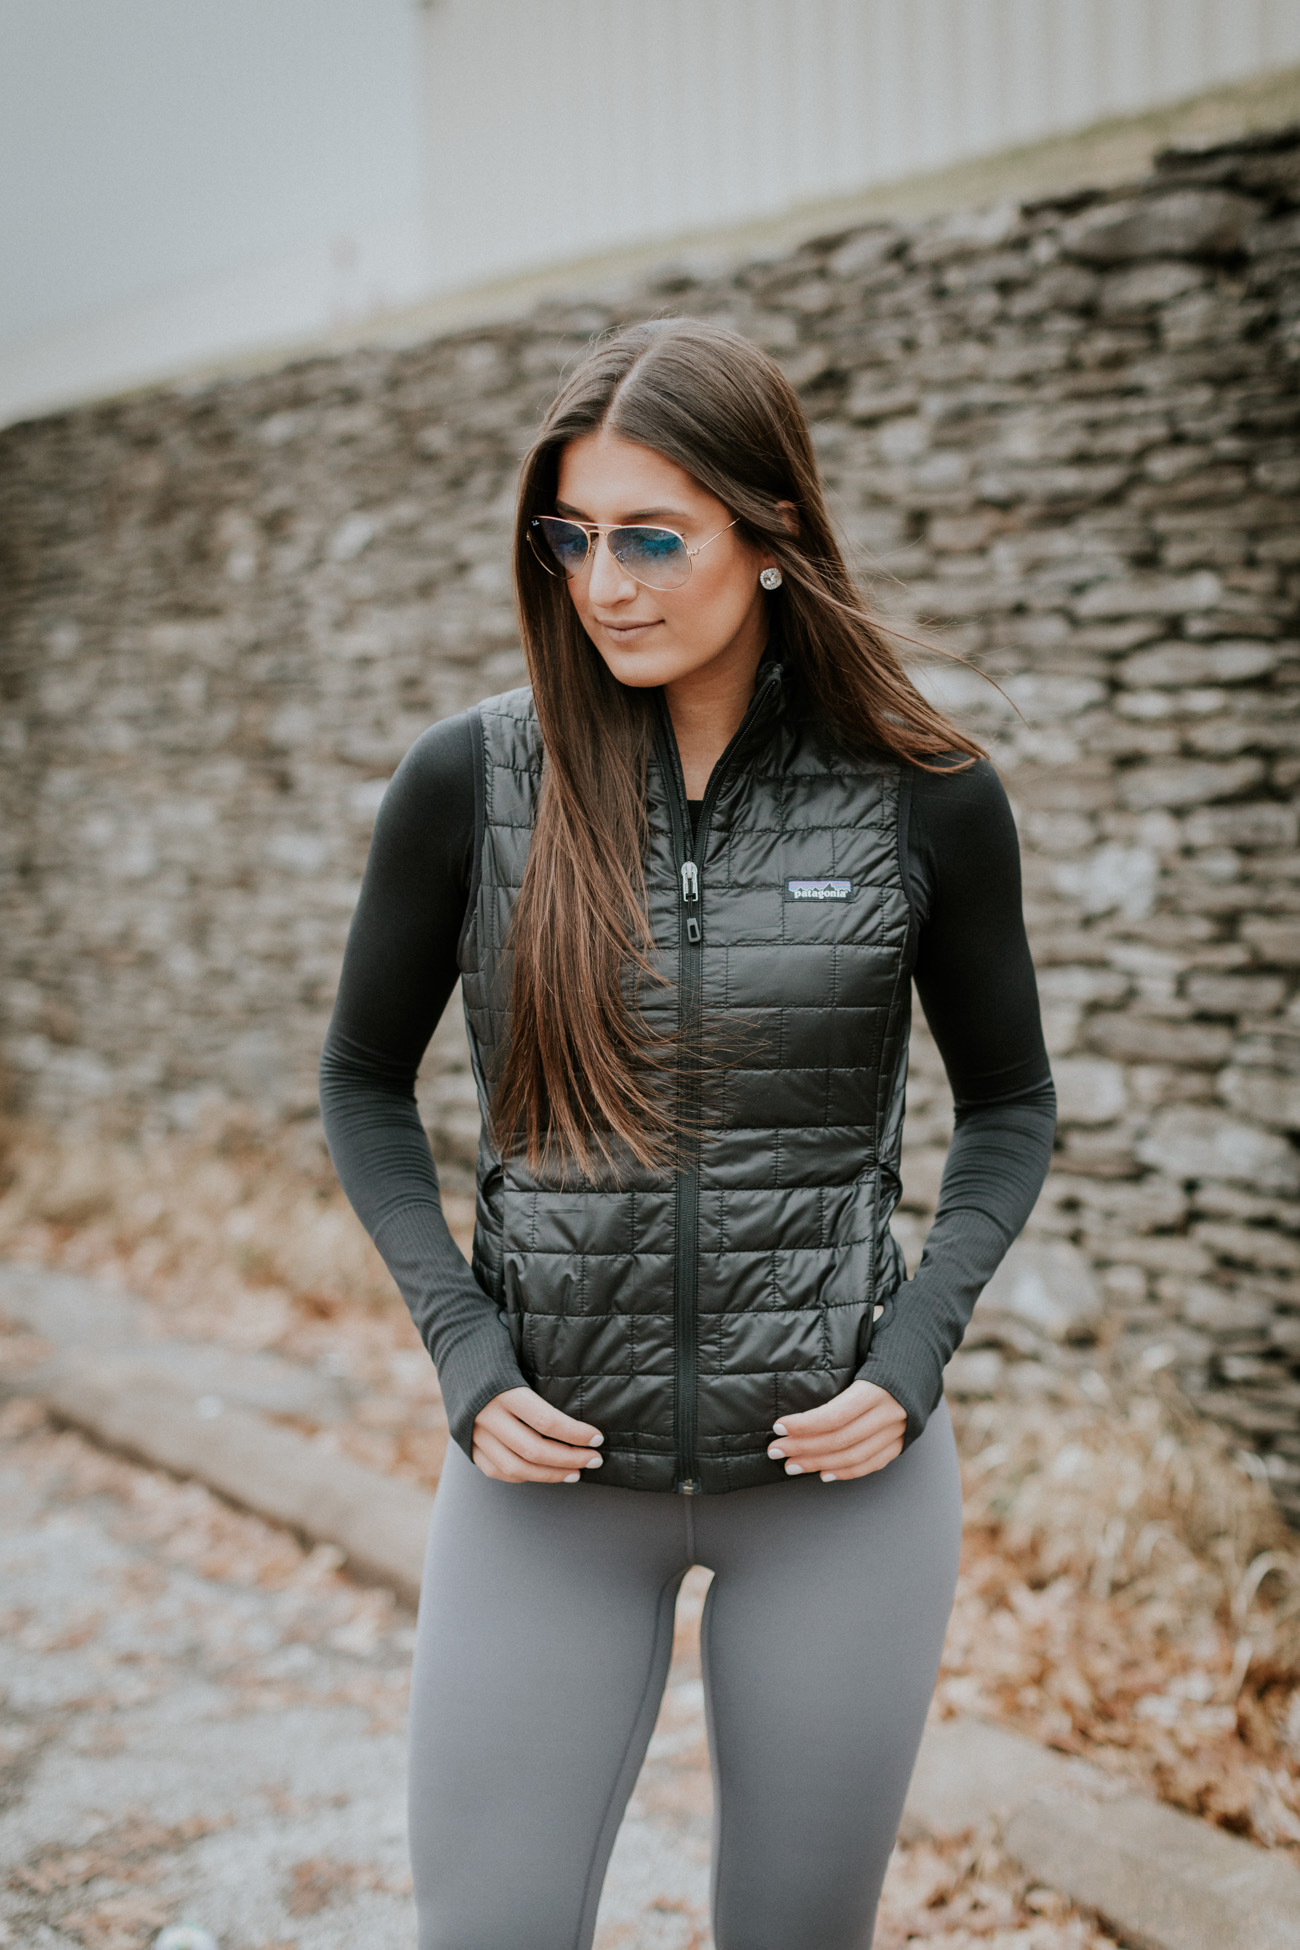 lululemon swiftly tech crewneck, ray ban aviators, patagonia nano puff insulated vest, lululemon crop pullover, lululemon align pant, align crops, nike air presto sneaker, black crop pullover, crop long sleeve, athleisure outfit, a southern drawl workouts, winter activewear, fall activewear, lululemon high times pant, lululemon wunder under pant, lululemon activewear, athleisure, cute activewear outfit, a southern drawl workouts, weekly workout routine, weekly workouts, weekly exercises, polar a360 watch, cute activewear, cute workout outfit, running routine, girl gains, fitness inspiration, fitspo, athleisure, nike athleisure outfit // grace wainwright a southern drawl